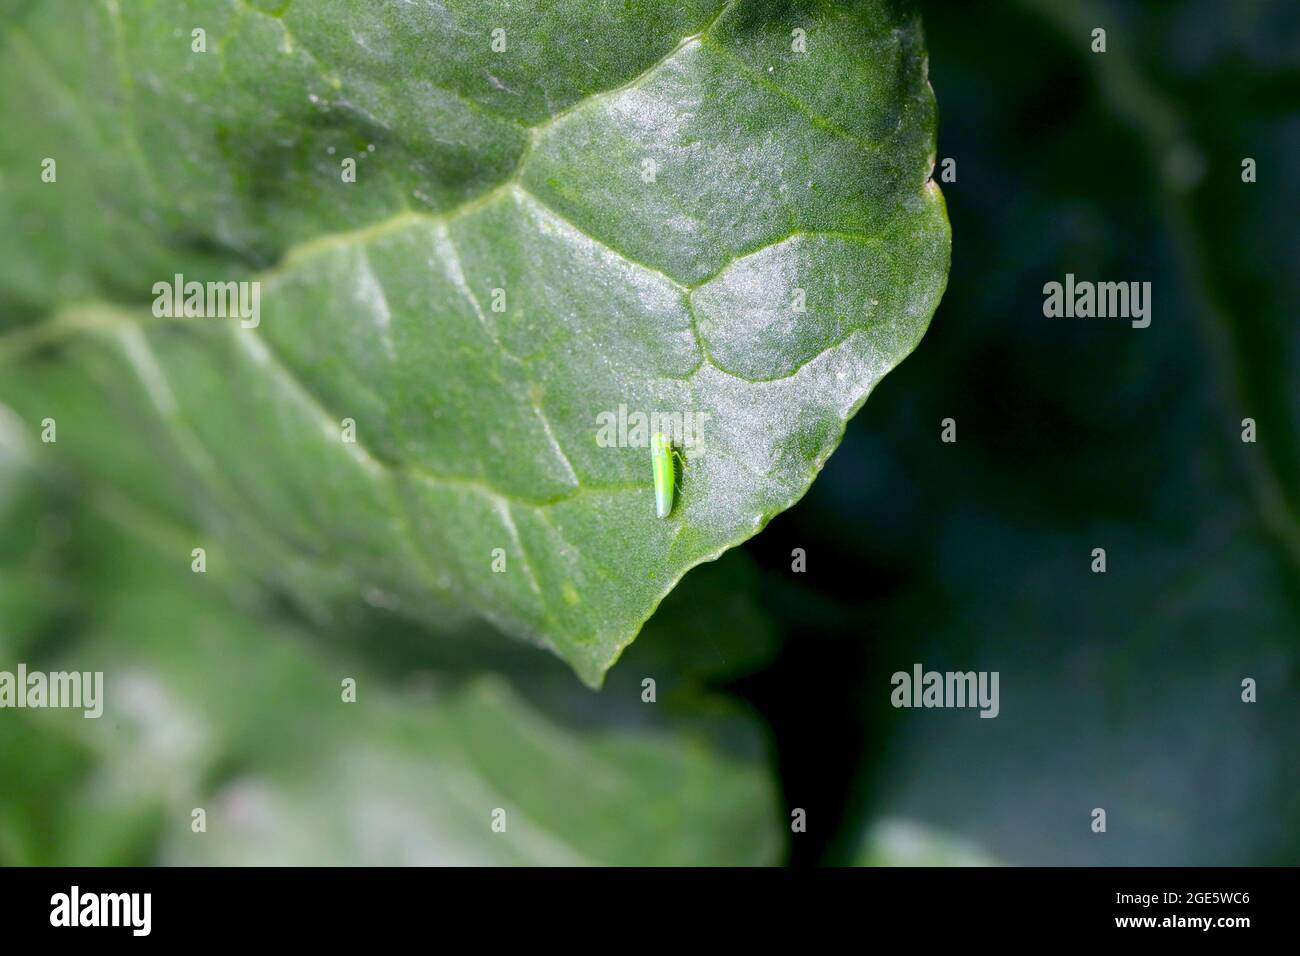 Potato leafhopper (Empoasca) belongs to family Cicadellidae. It is a pest of many types of Crops. Insect on sugar beet leaf. Stock Photo